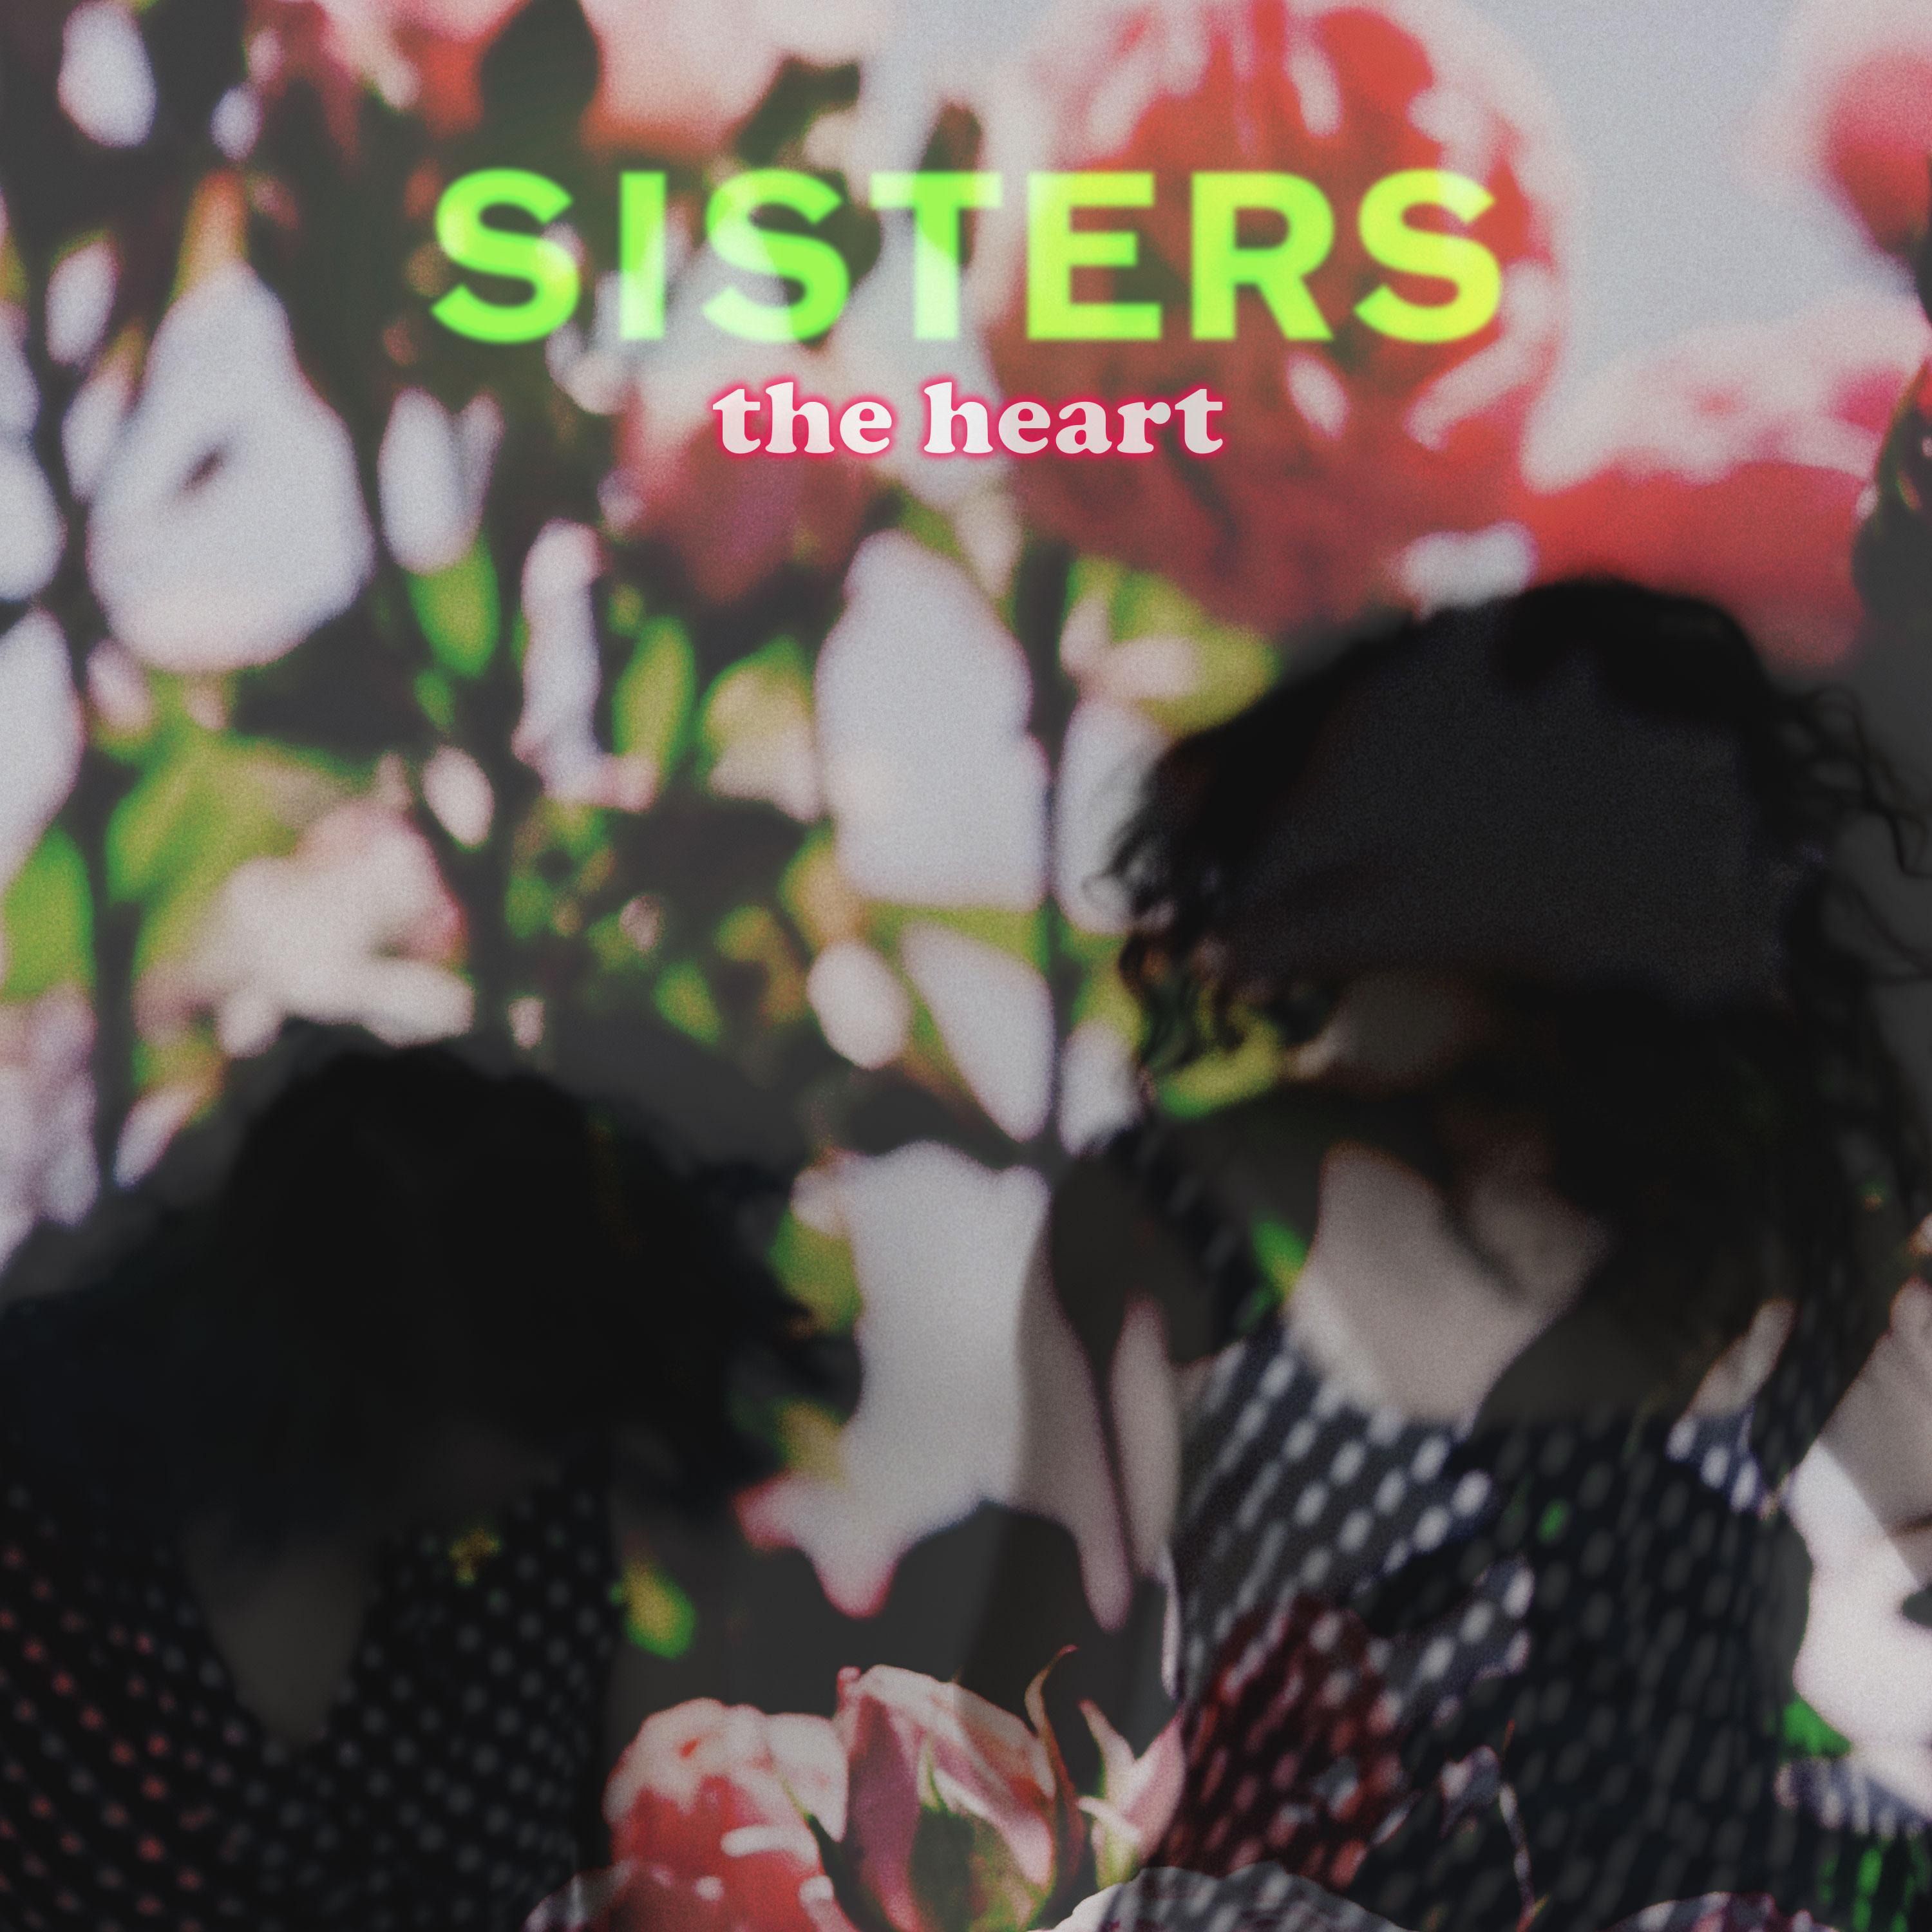 Thumbnail for "SISTERS: A Preview".